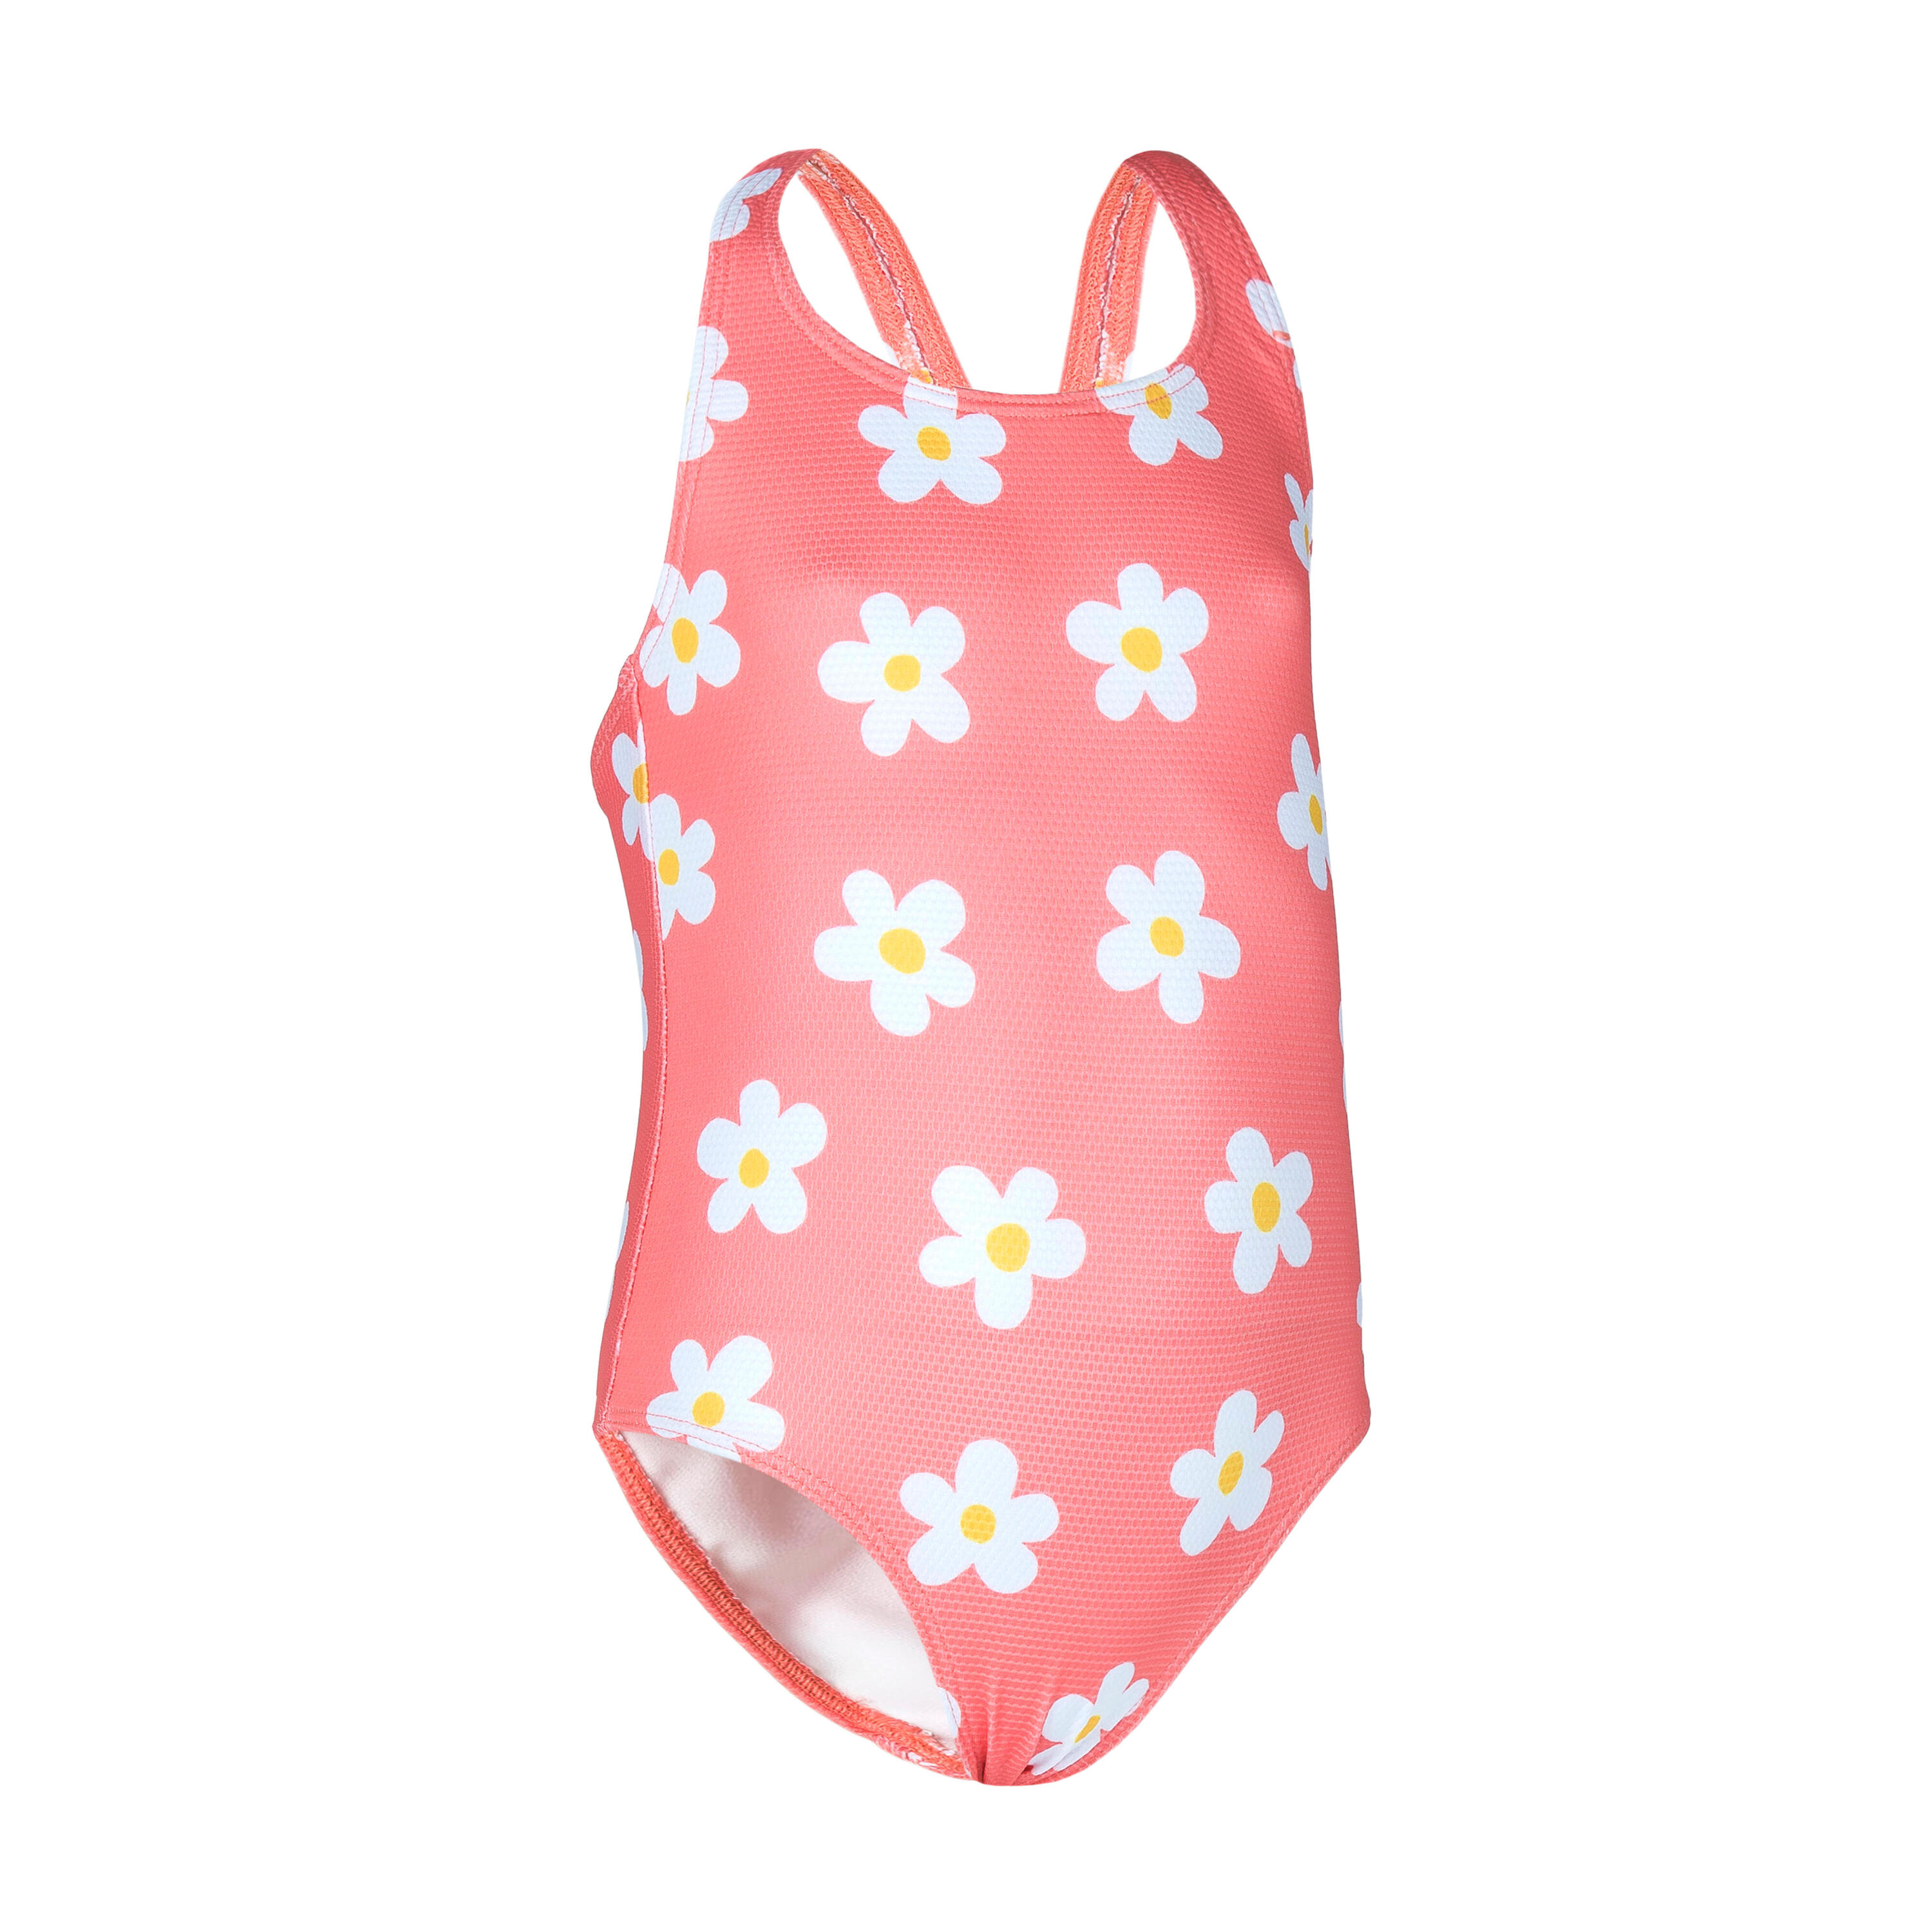 Baby Girls' 1-Piece Swimsuit waffle texture coral Flower print 6/12